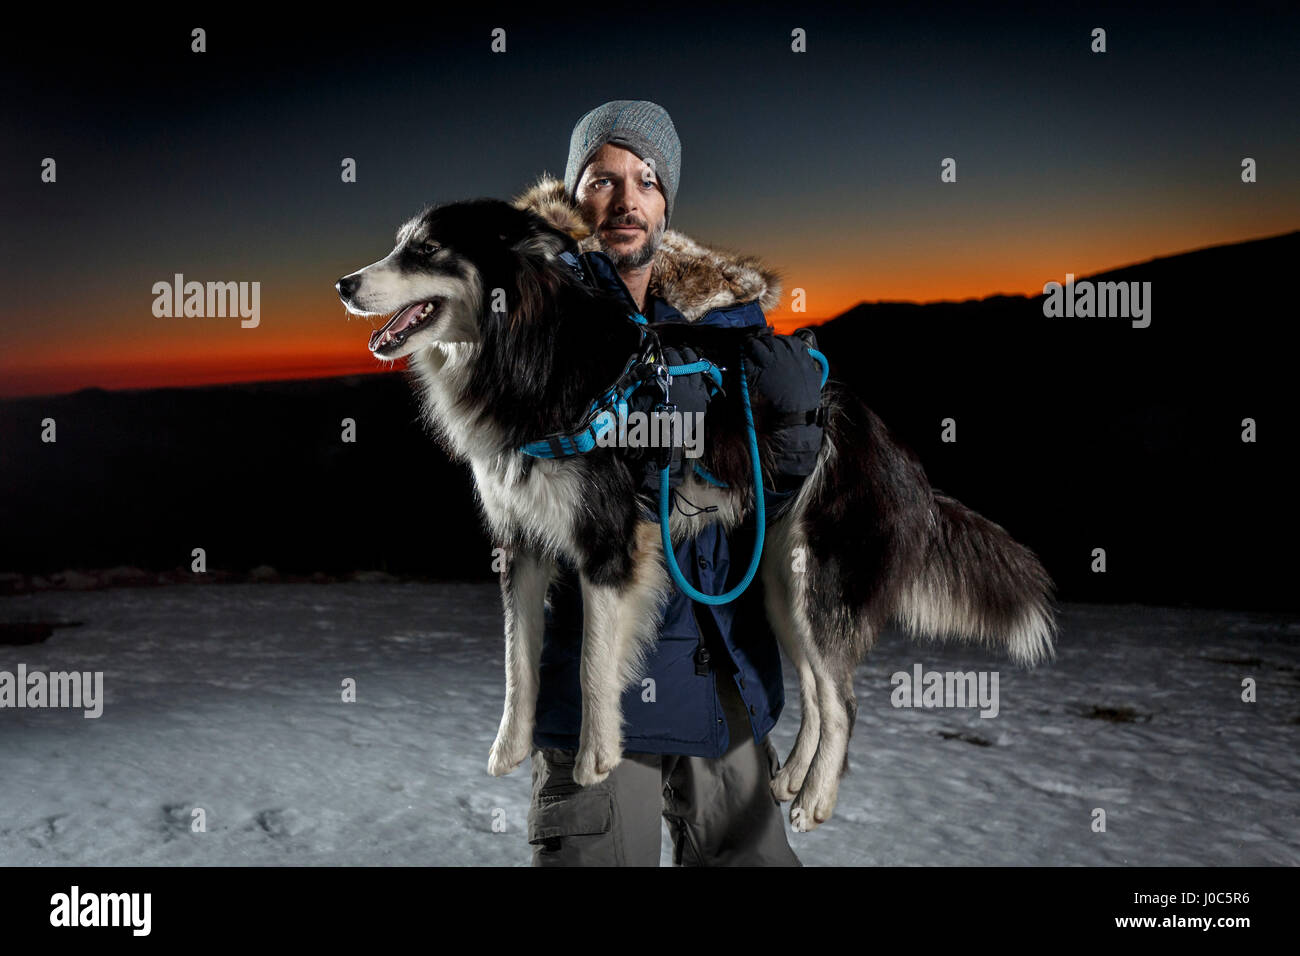 Portrait of mature man carrying dog in snow at night Stock Photo